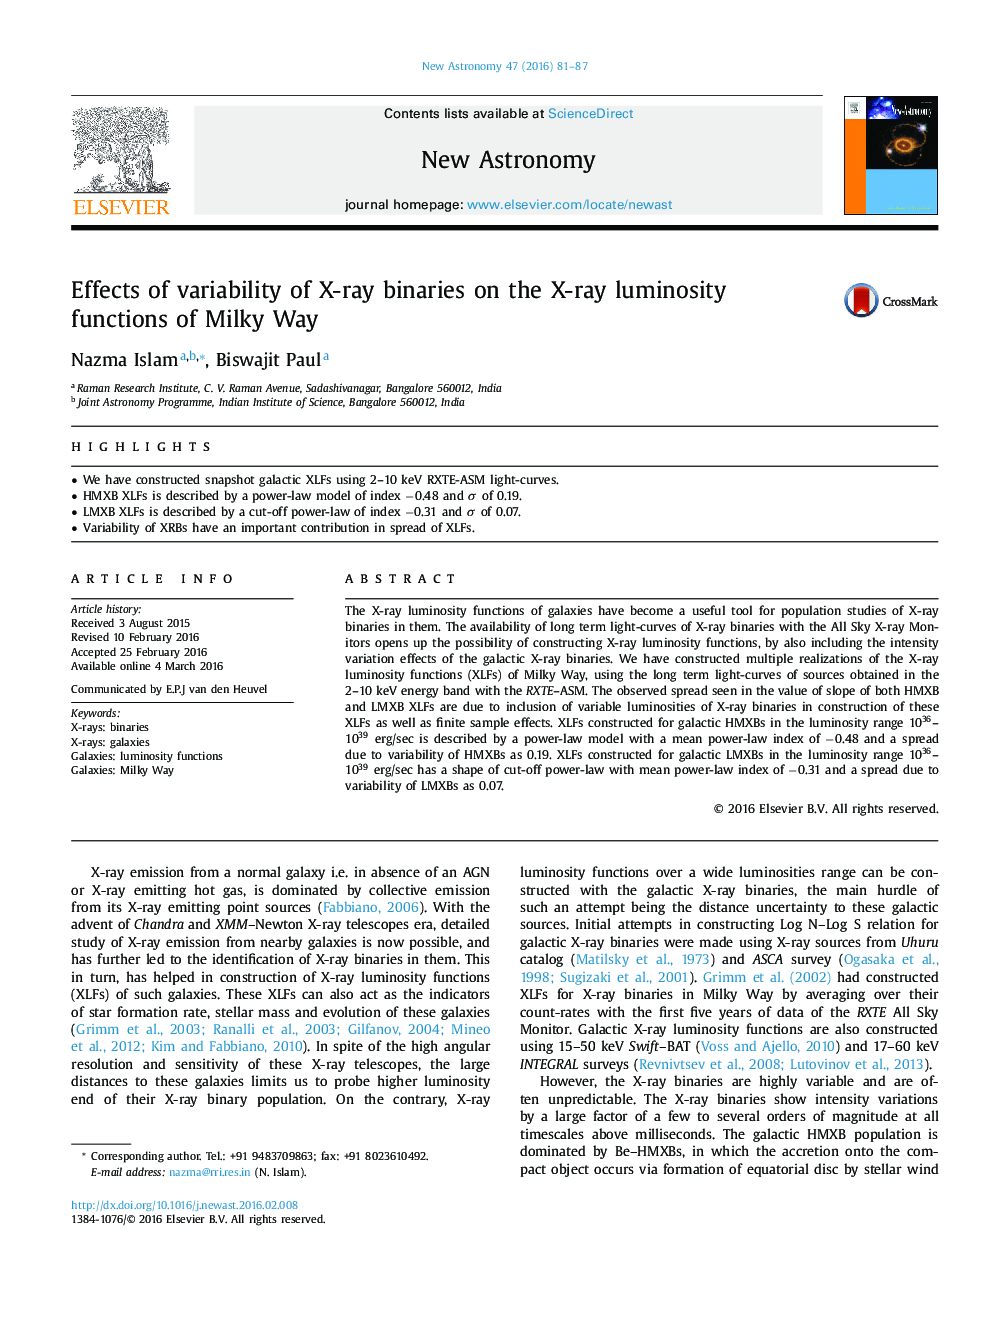 Effects of variability of X-ray binaries on the X-ray luminosity functions of Milky Way